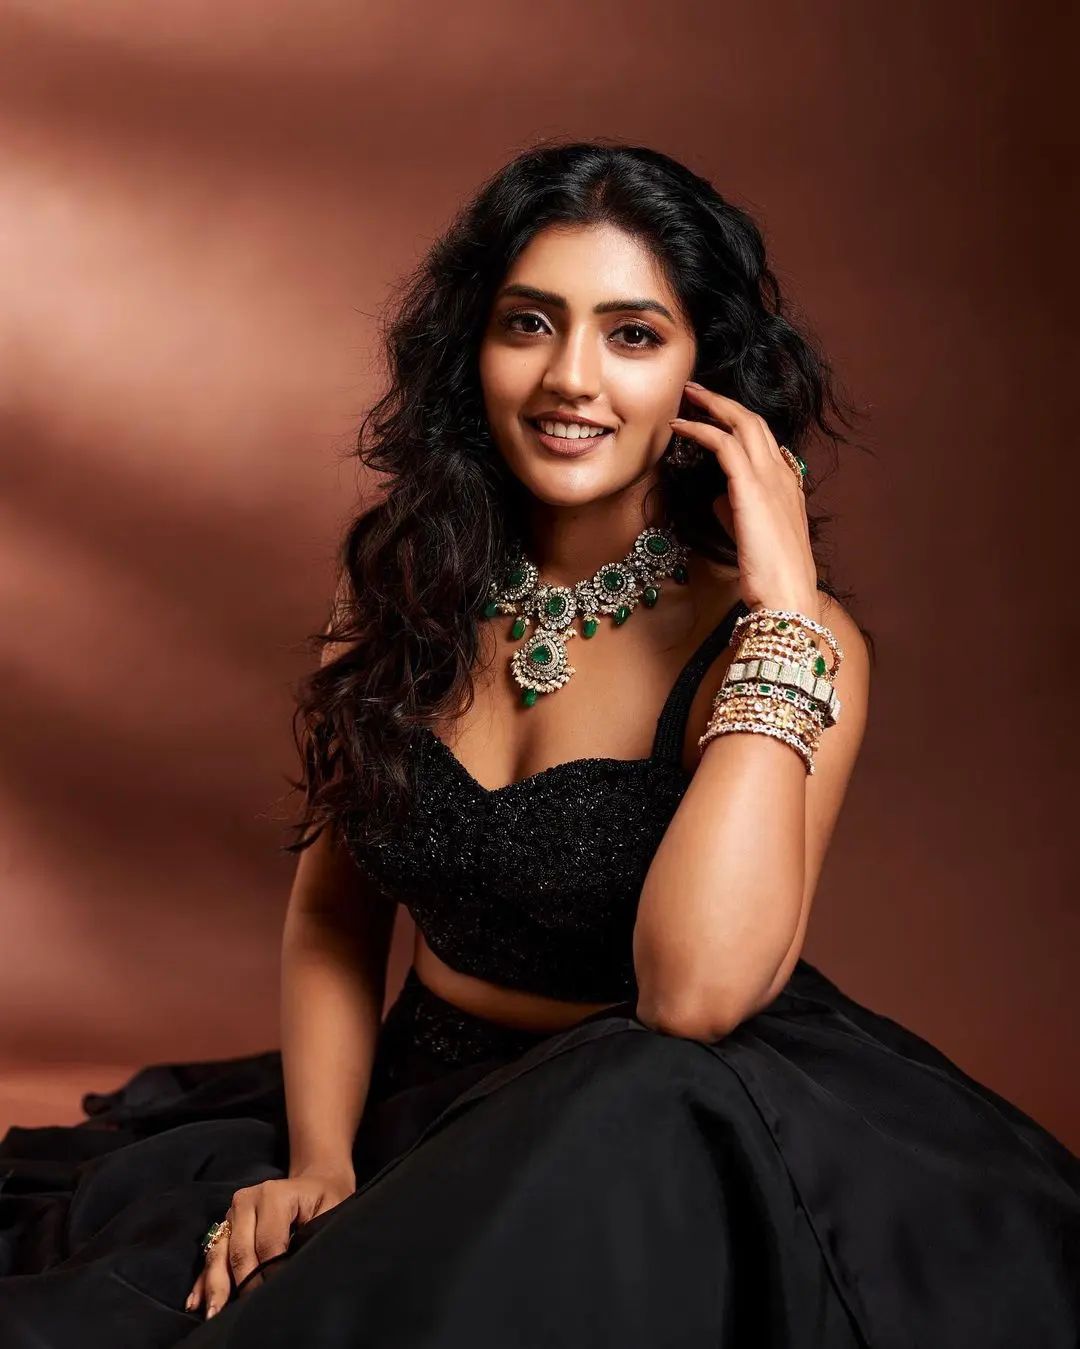 Magnificent looks of Eesha Rebba in black